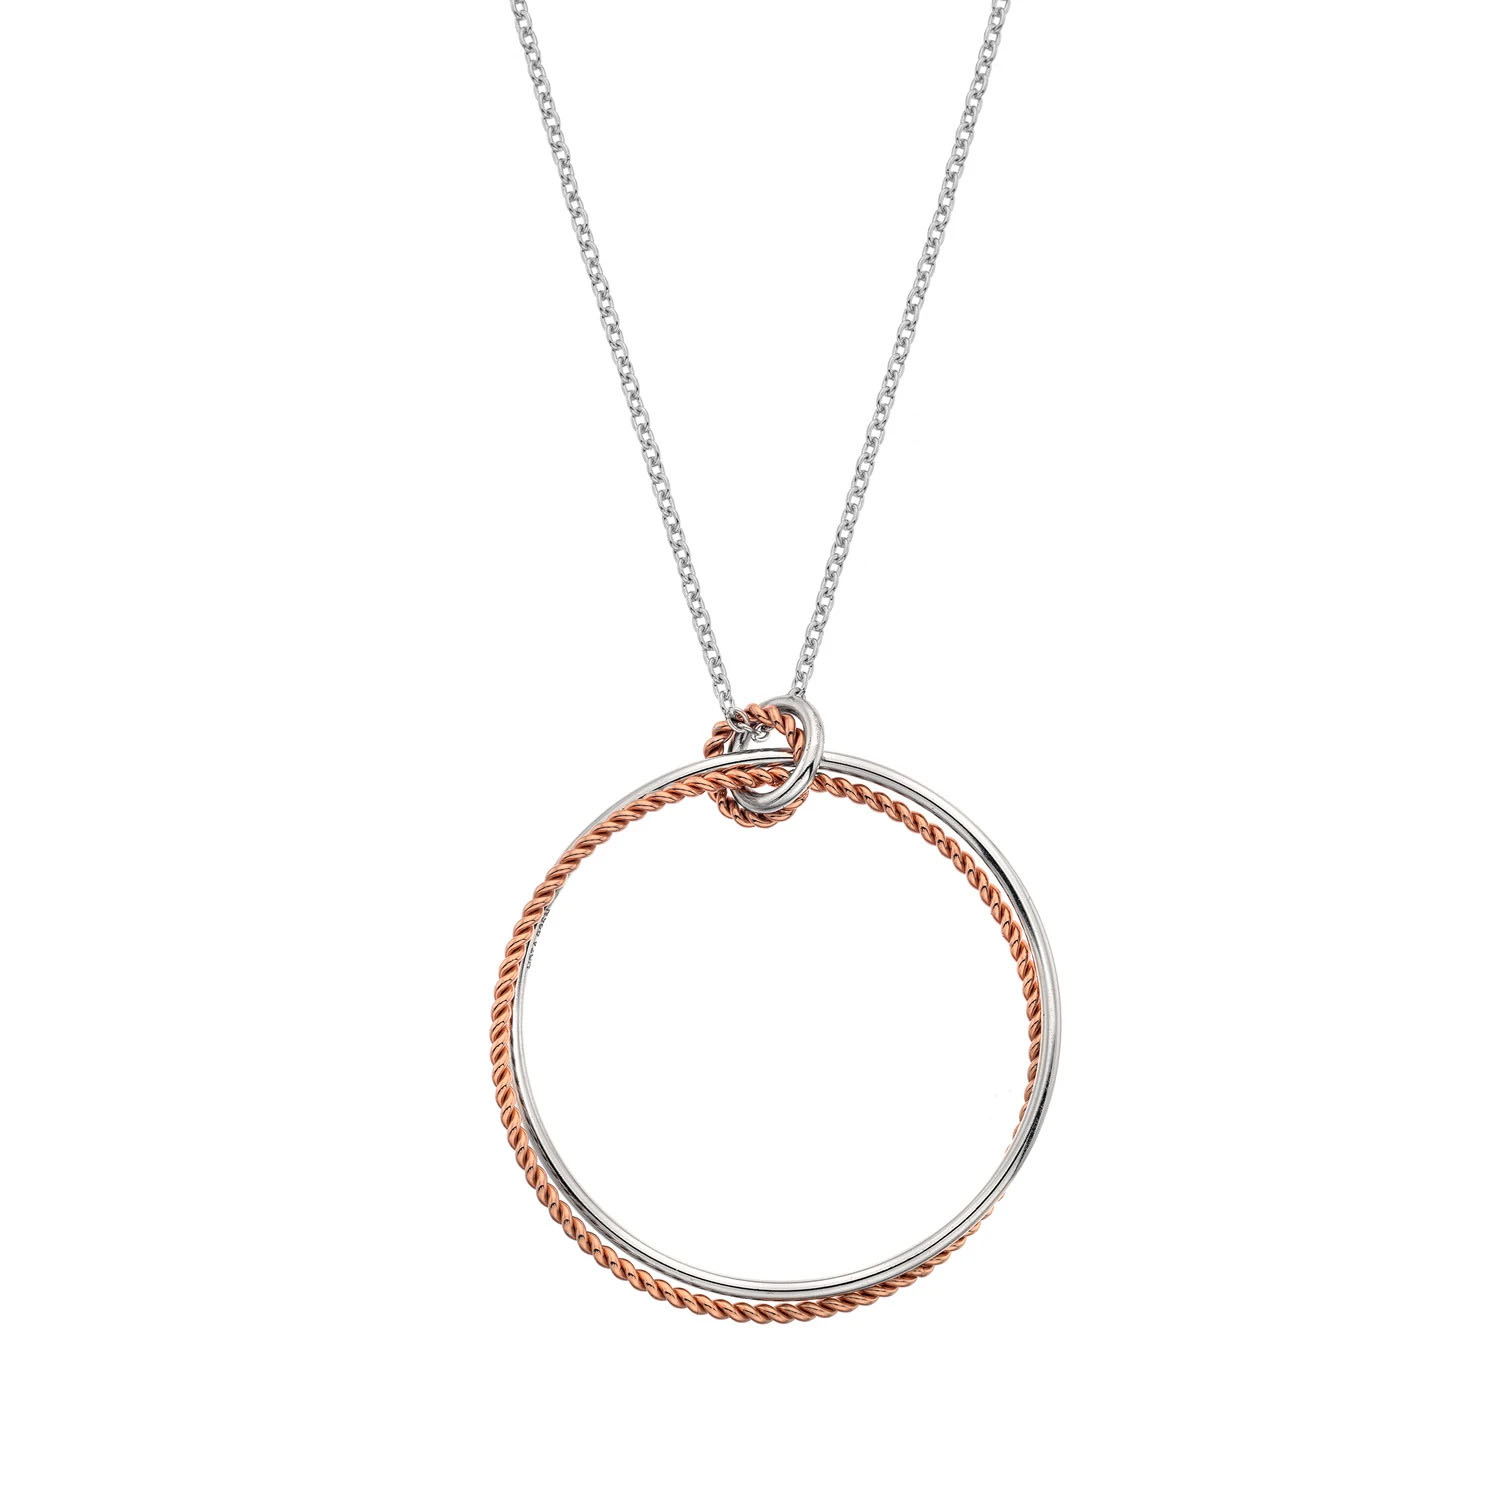 Wholesale Customized Jewelry Circle Sterling Silver Rose Gold Plated Necklace OEM/ODM Jewelry OEM ODM supplier